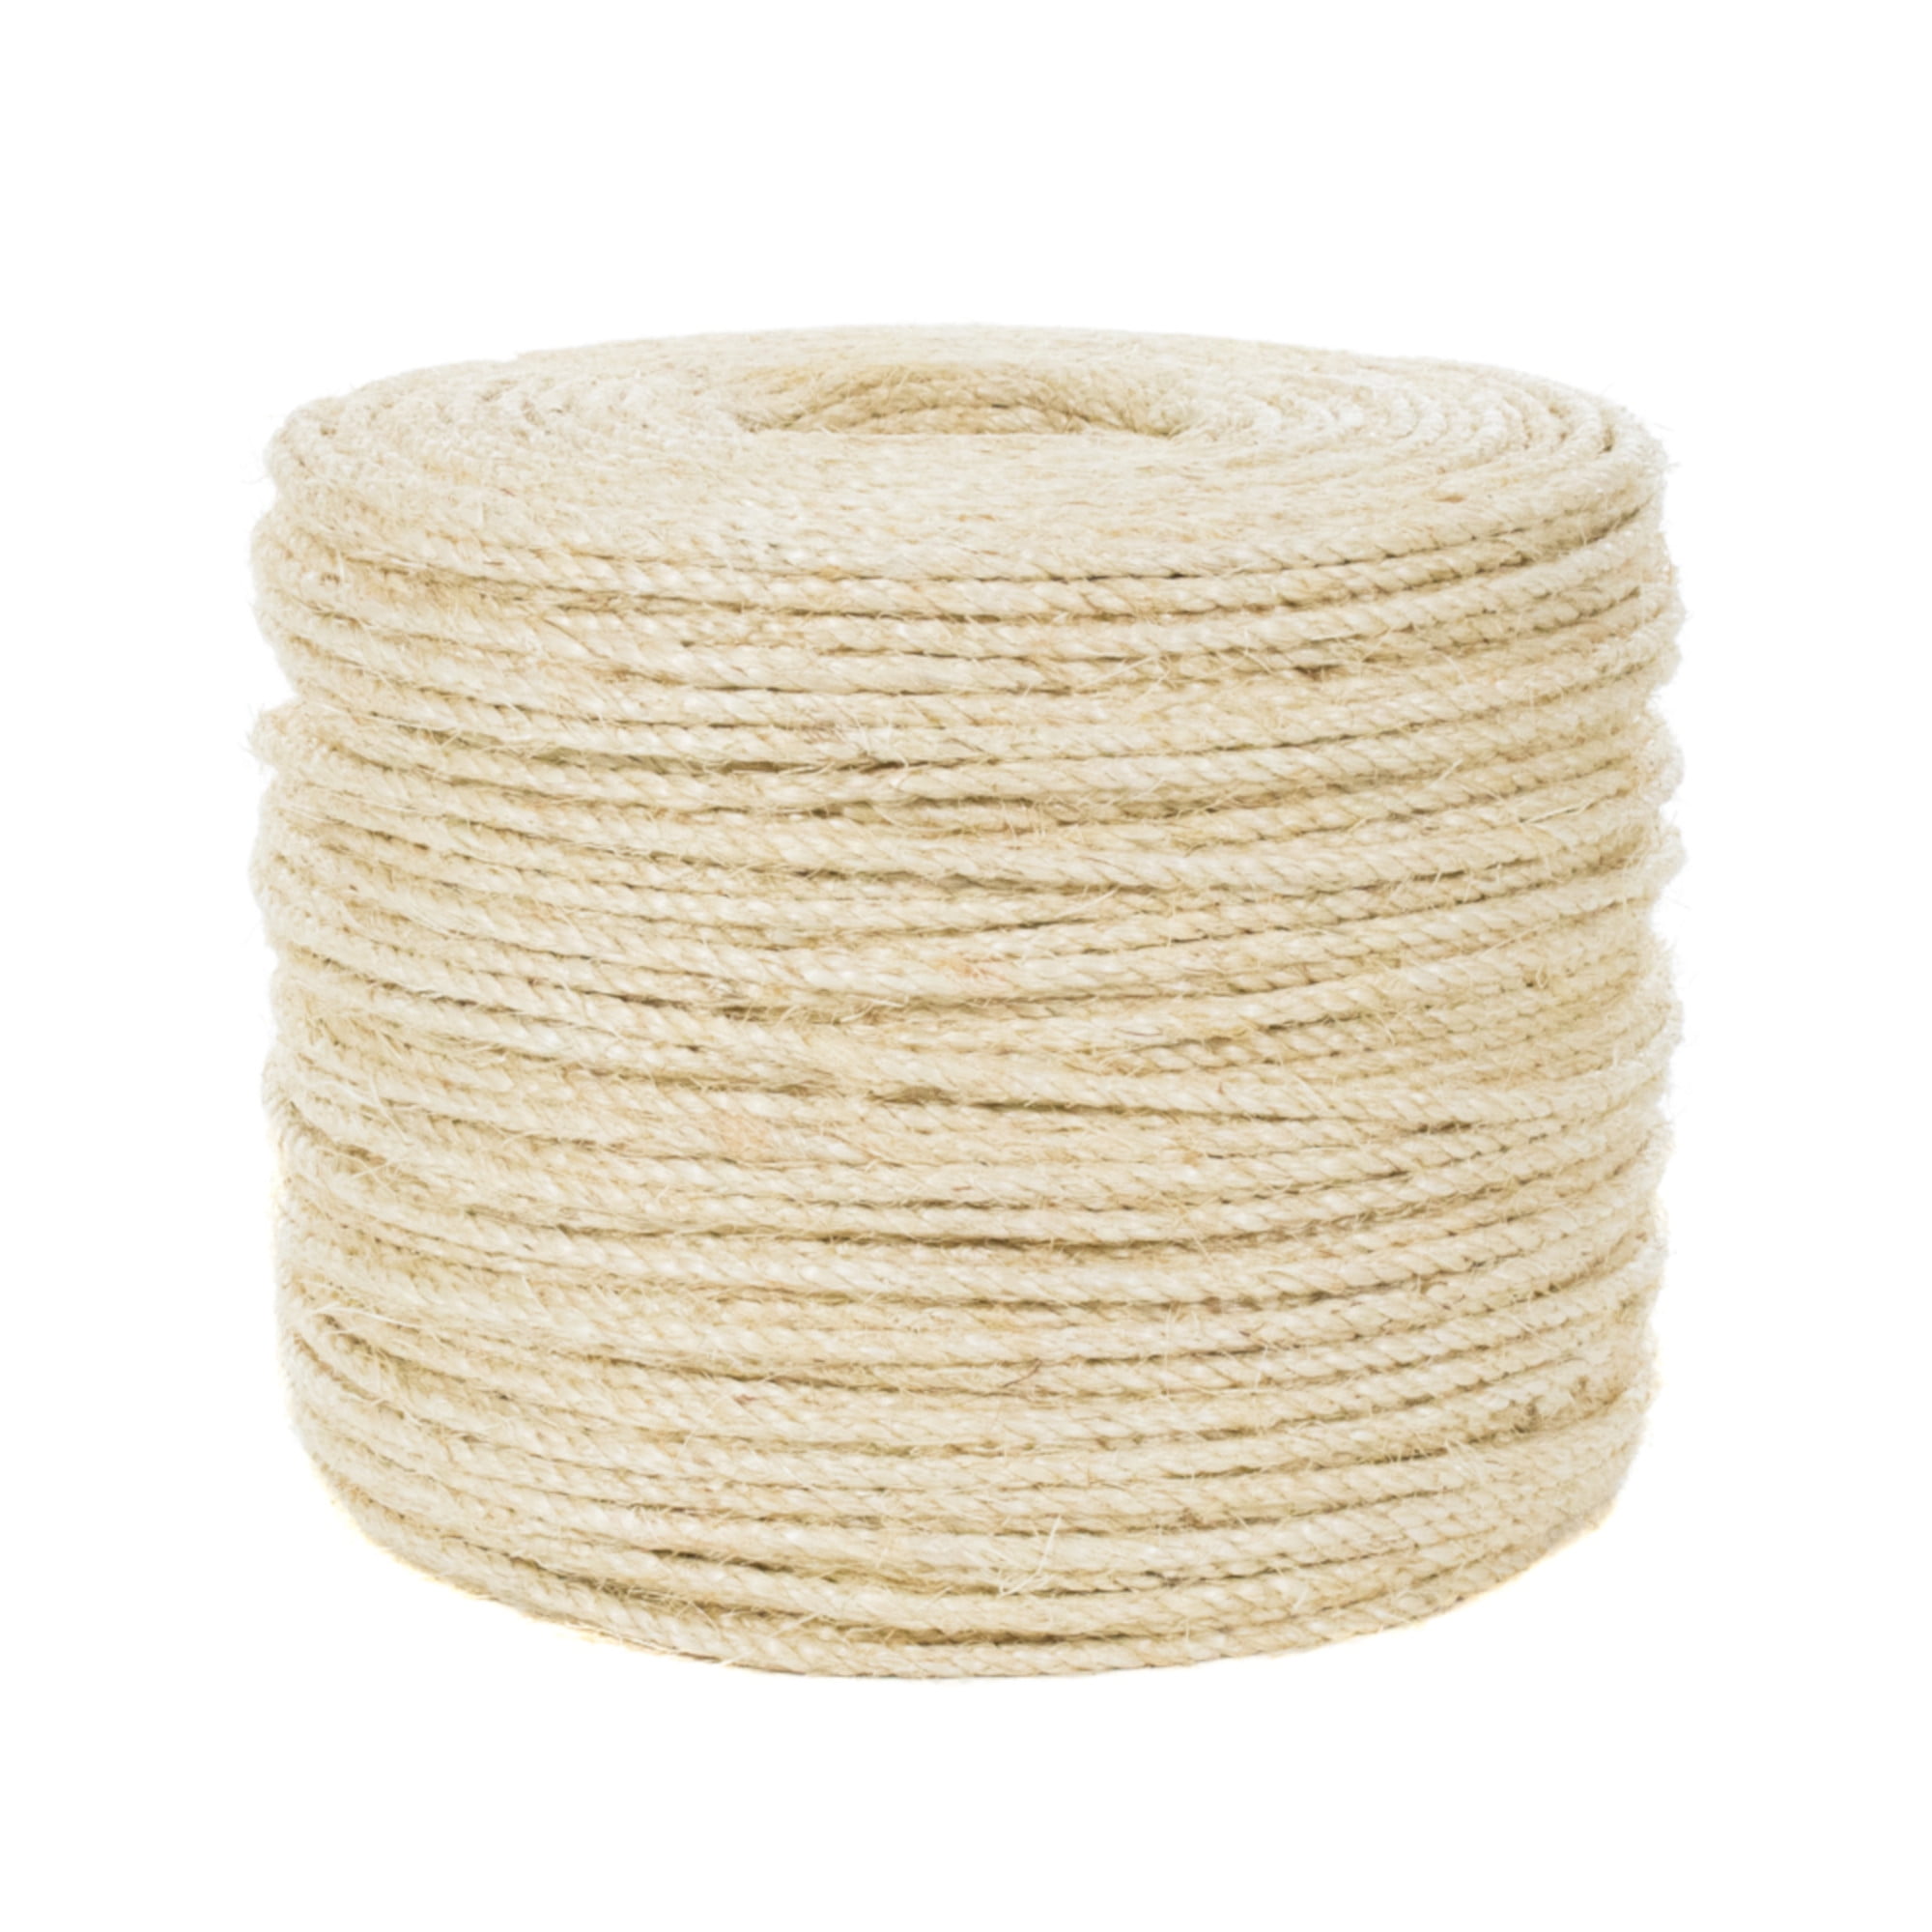 1/4 1 1/4 3/16 1 1/2 5/8 White Cotton Rope 1 GOLBERG Twisted 100% Natural Cotton Rope 5/32 5/16 Several Lengths to Choose 3/16 7/32 1/4 5/16 3/8 1/2 5/8 3/4 1 1 1/4 GOLBERG G 3/8 1/2 7/32 3/4 